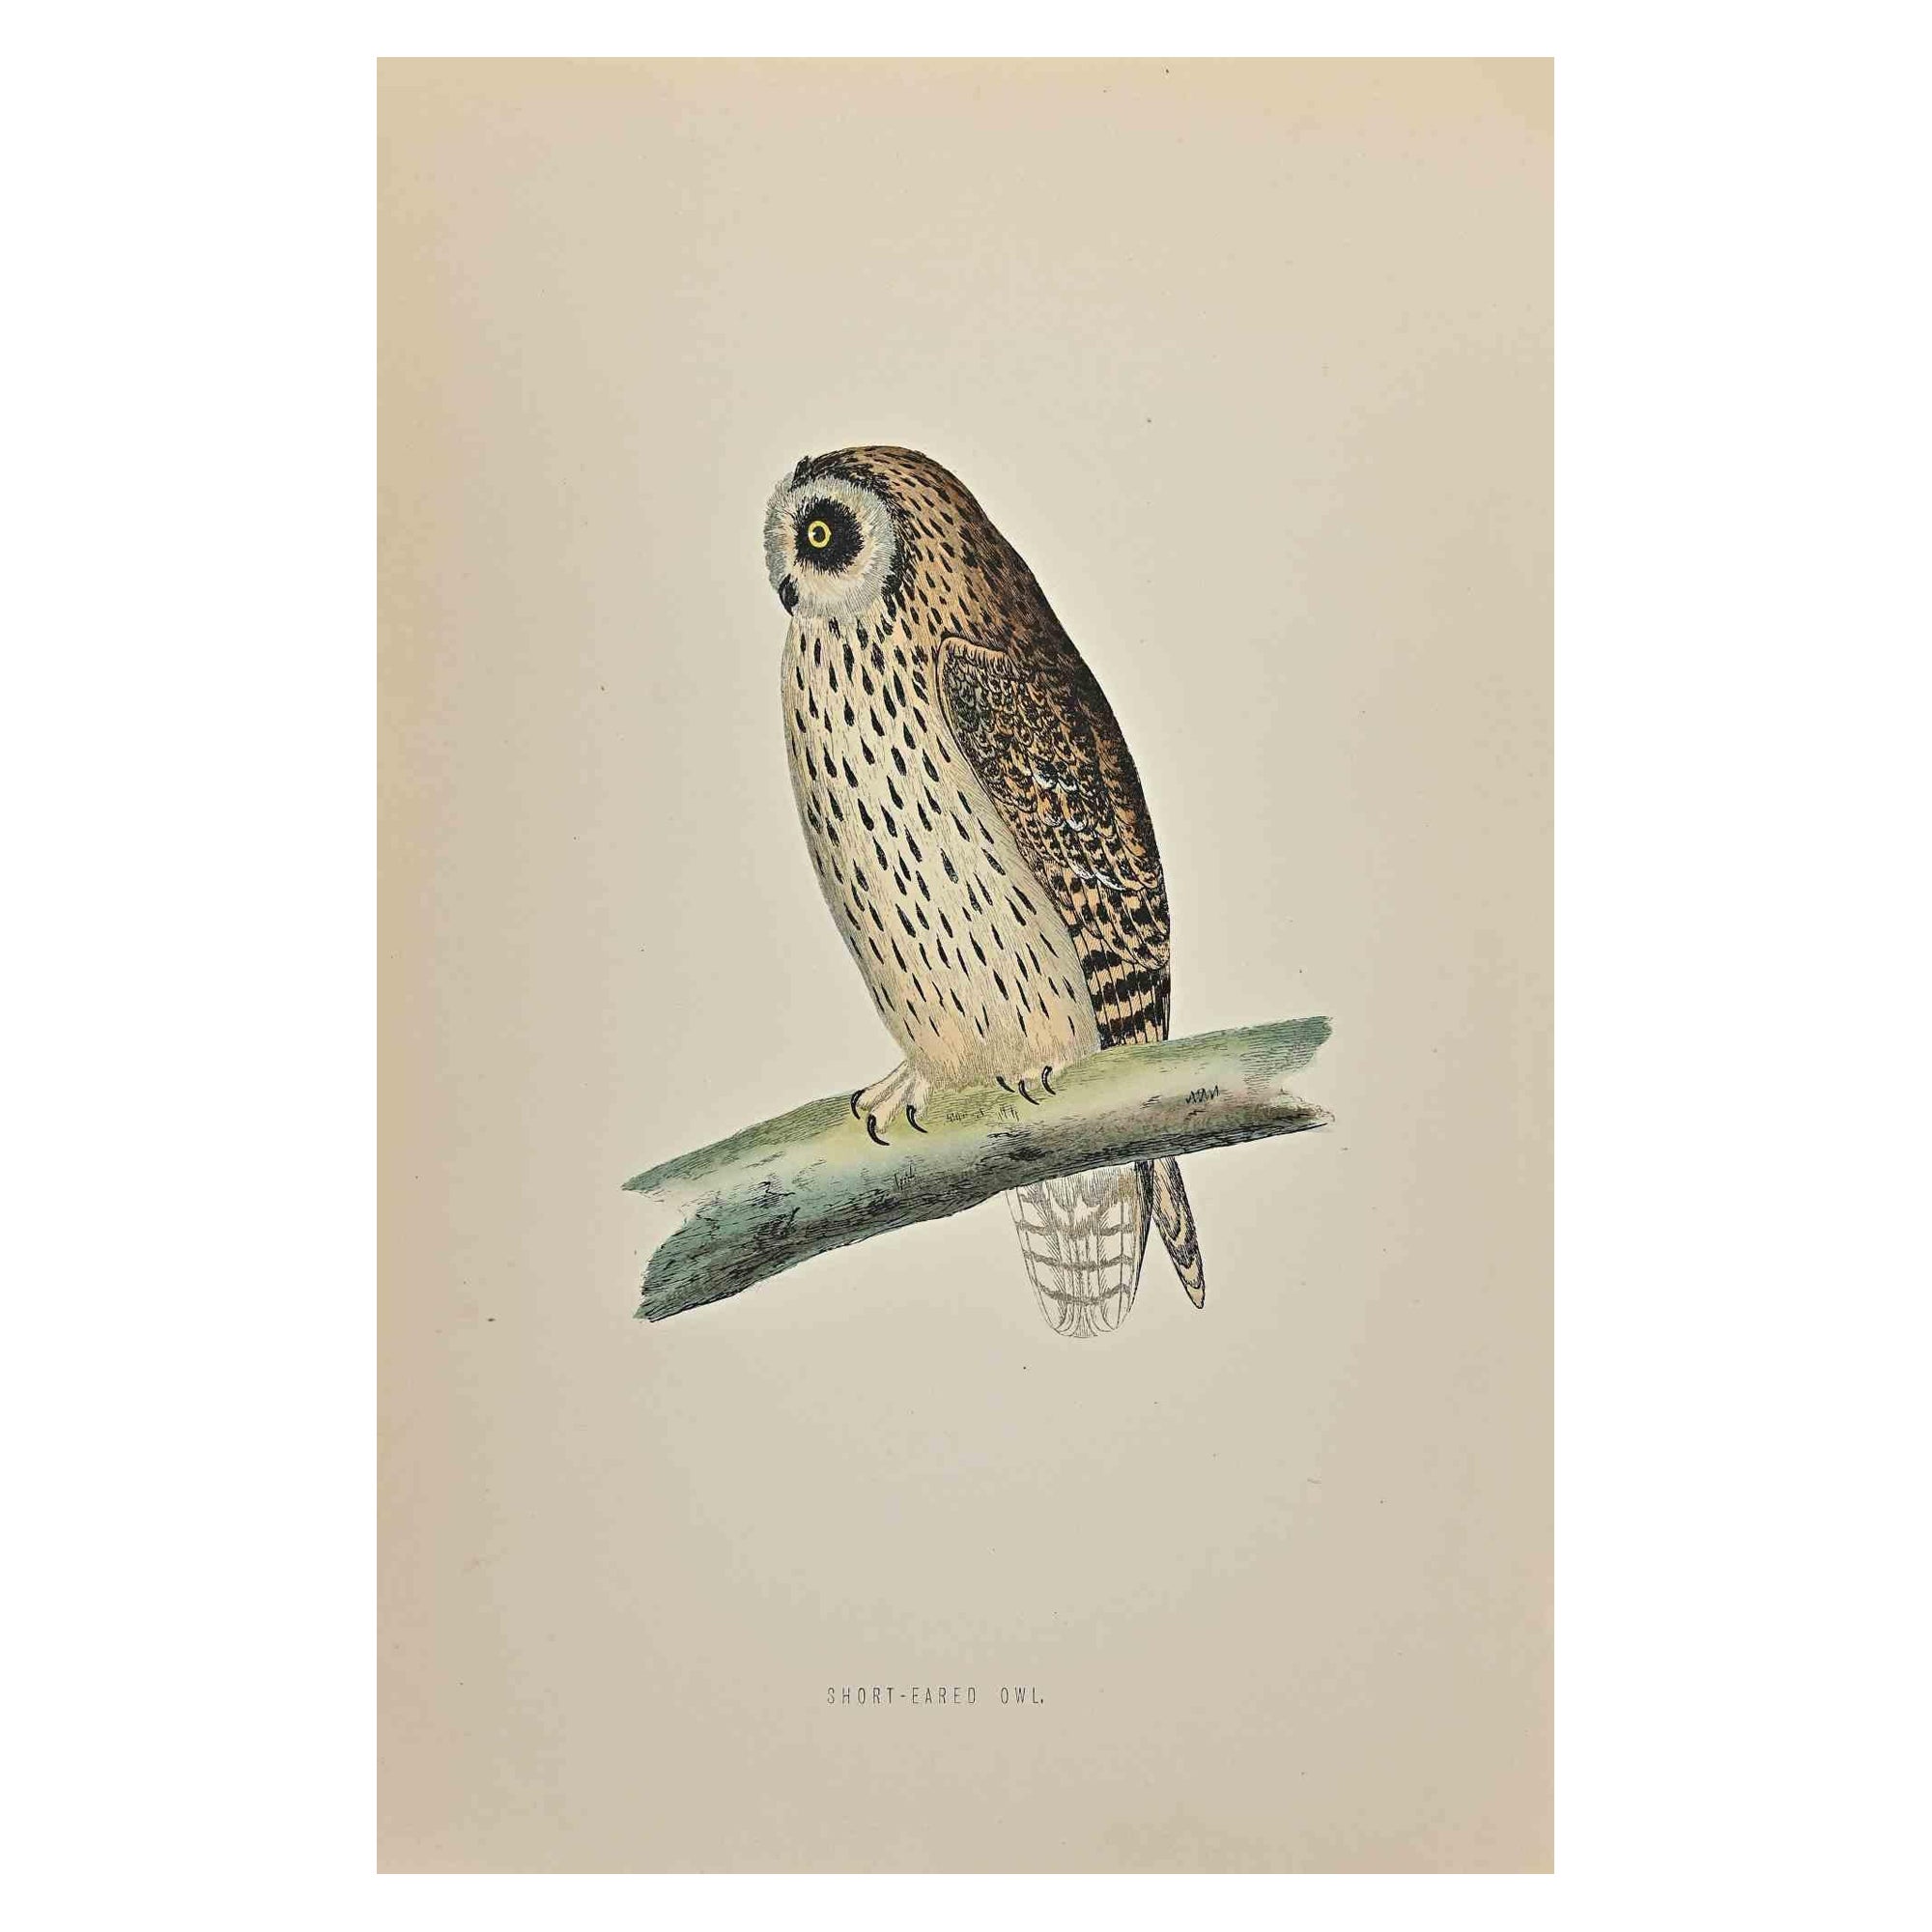 Short-Eared Owl is a modern artwork realized in 1870 by the British artist Alexander Francis Lydon (1836-1917) . 

Woodcut print, hand colored, published by London, Bell & Sons, 1870.  Name of the bird printed in plate. This work is part of a print